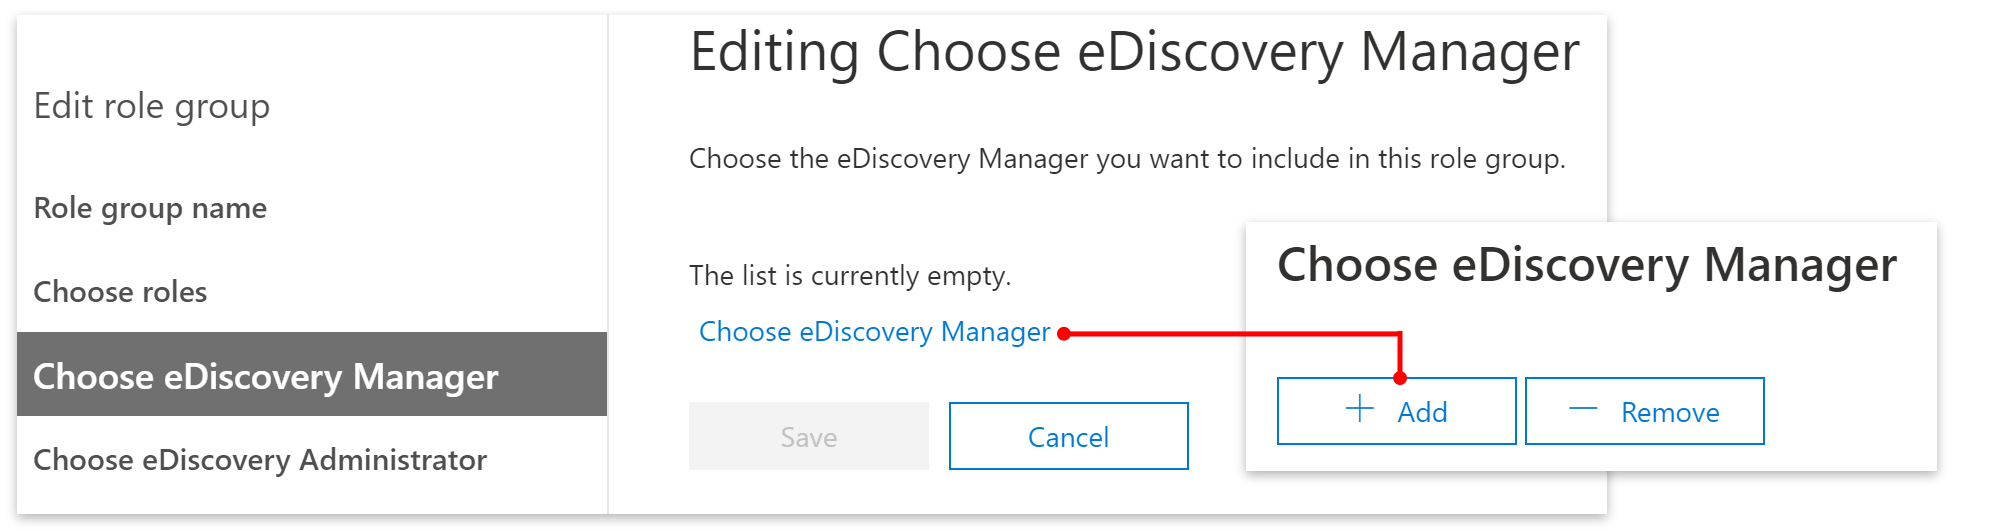 Choose eDiscovery Manager > Add